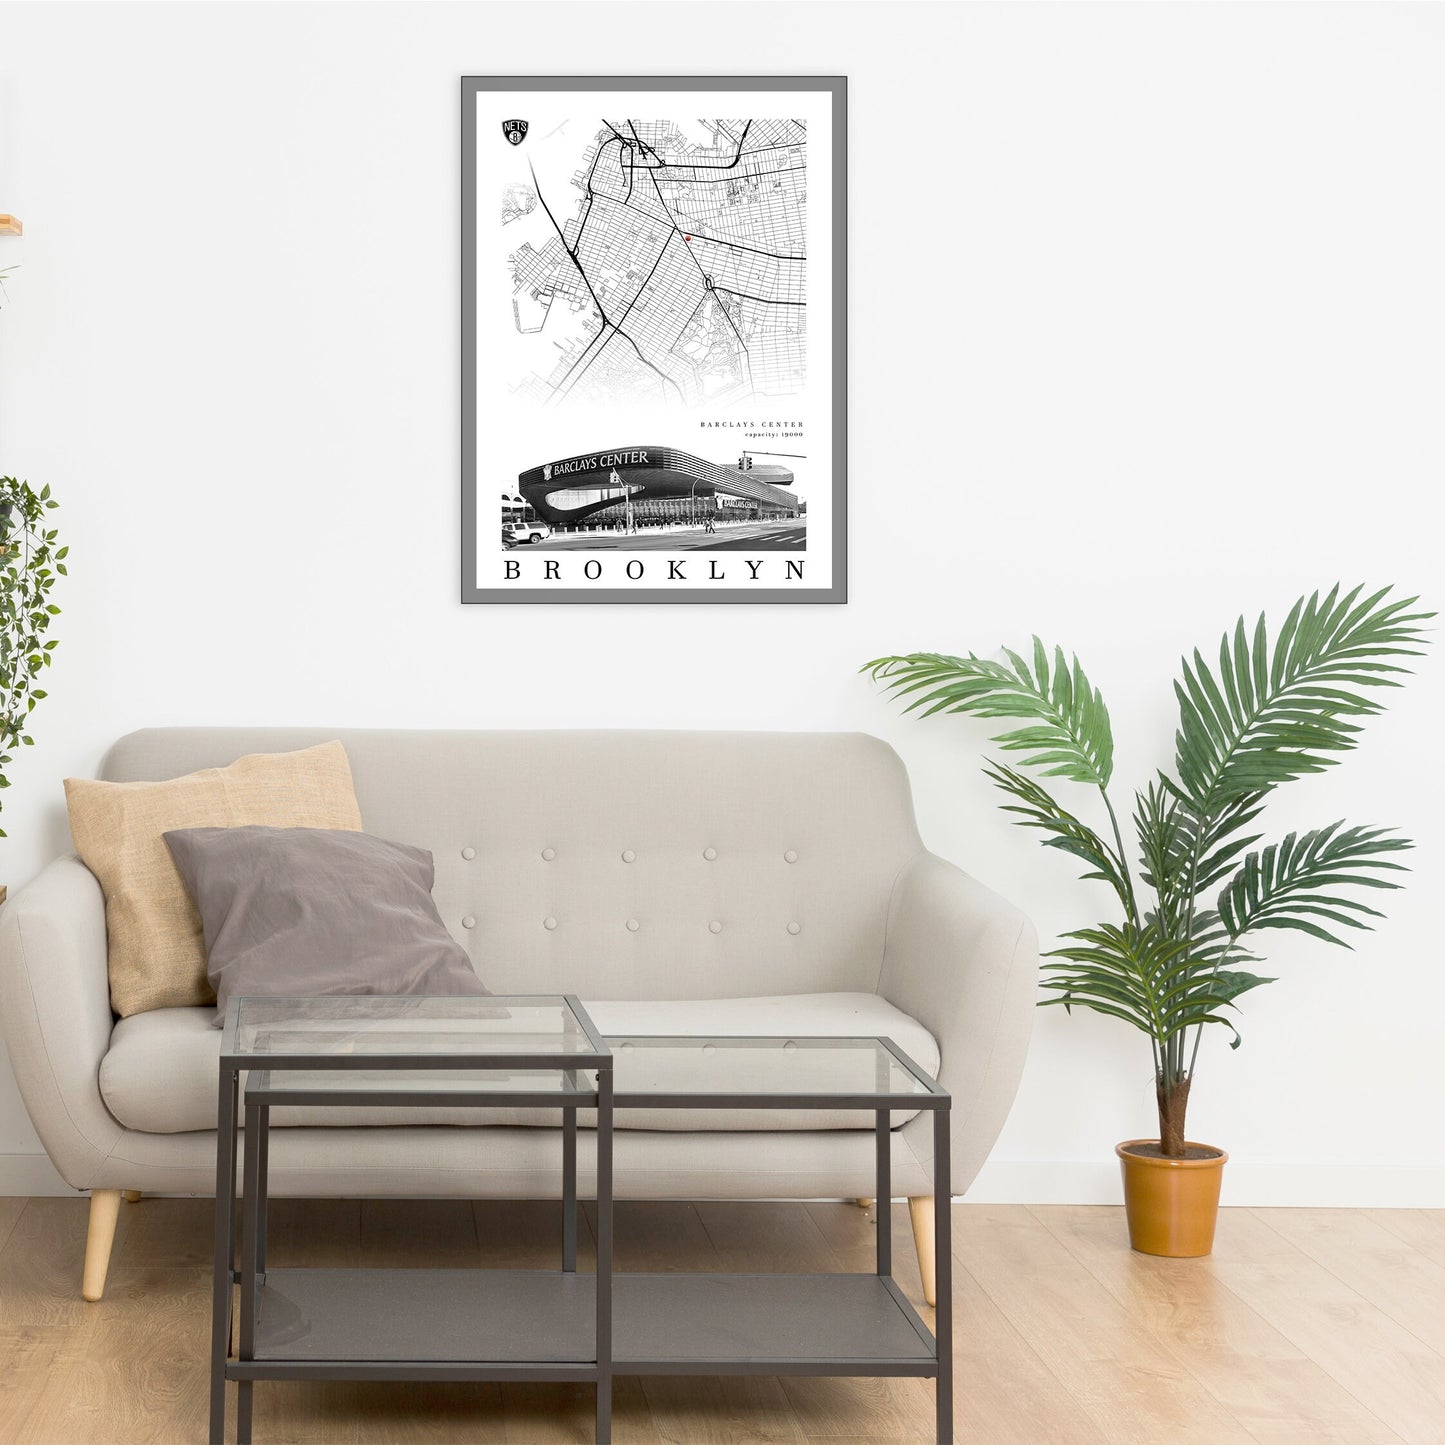 City map of BROOKLYN - Barclays Center - Home Decor Brooklyn - Barclays Center wall decor - Brooklyn poster - Print map